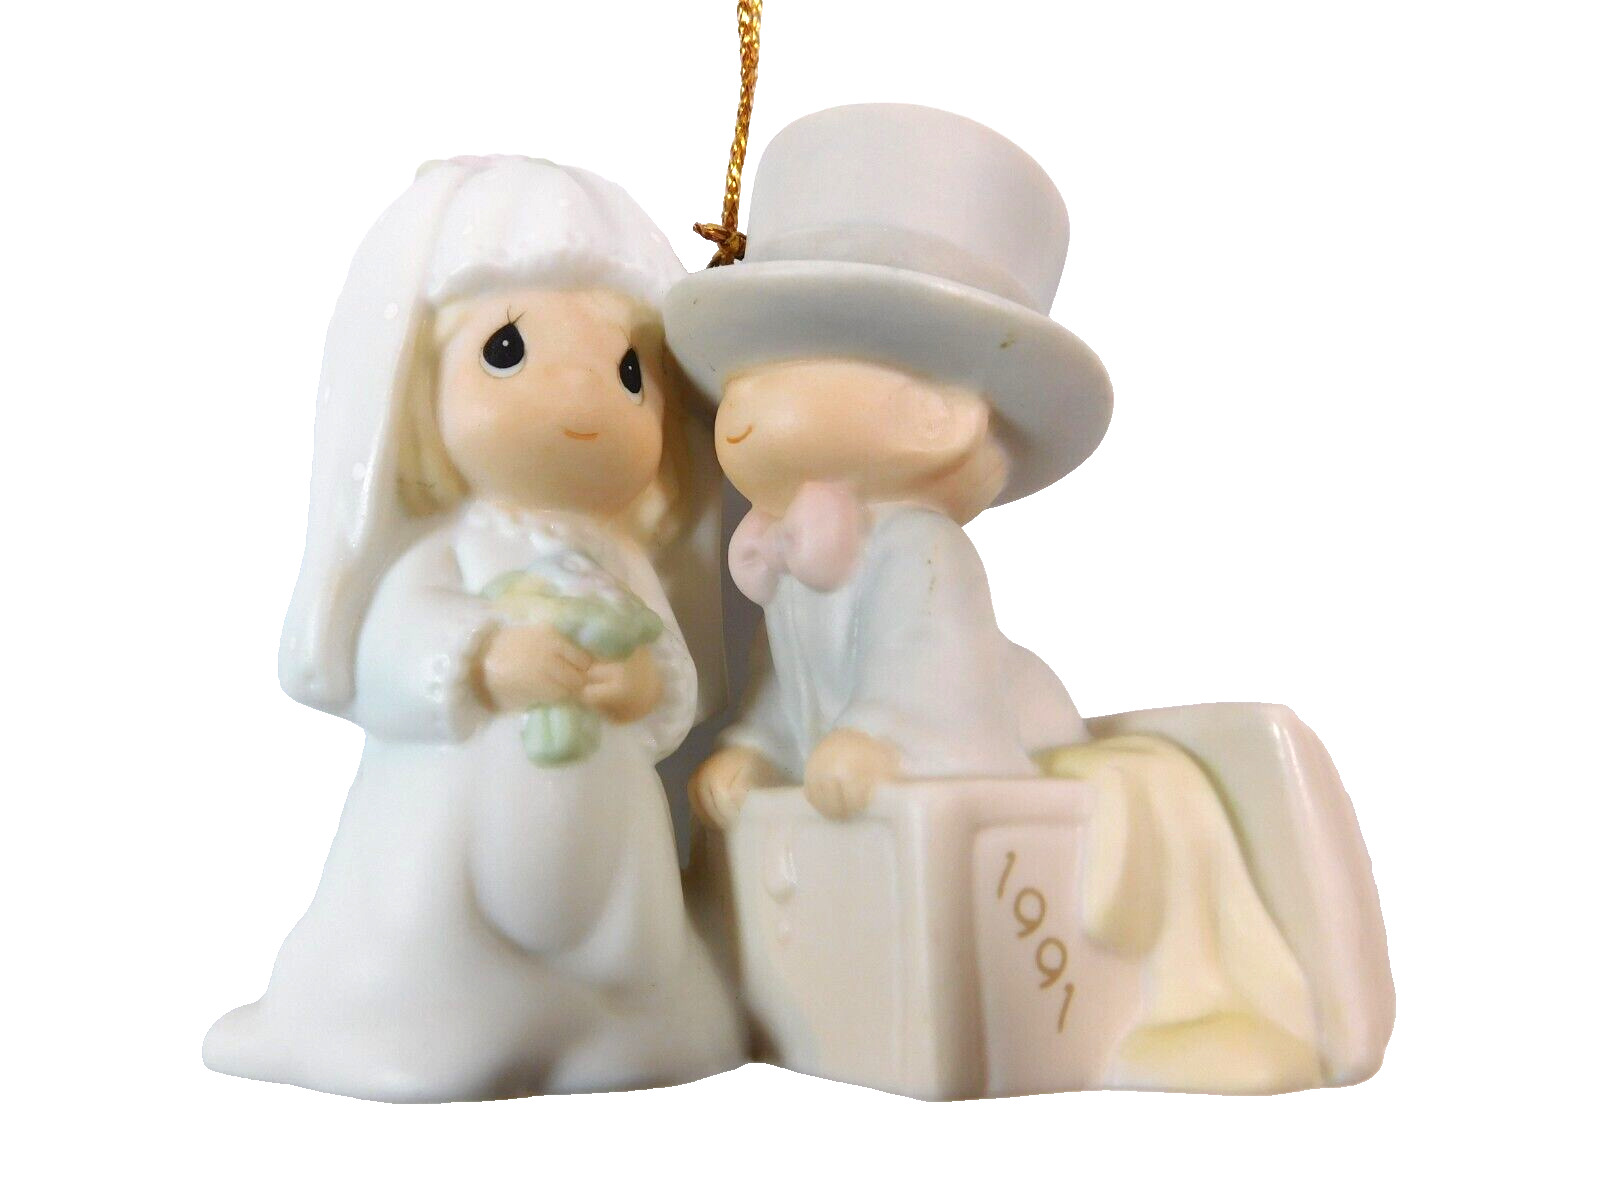 Vintage Enesco Wedding Ornament ~Our First Christmas Together 1991 S.J. Butcher